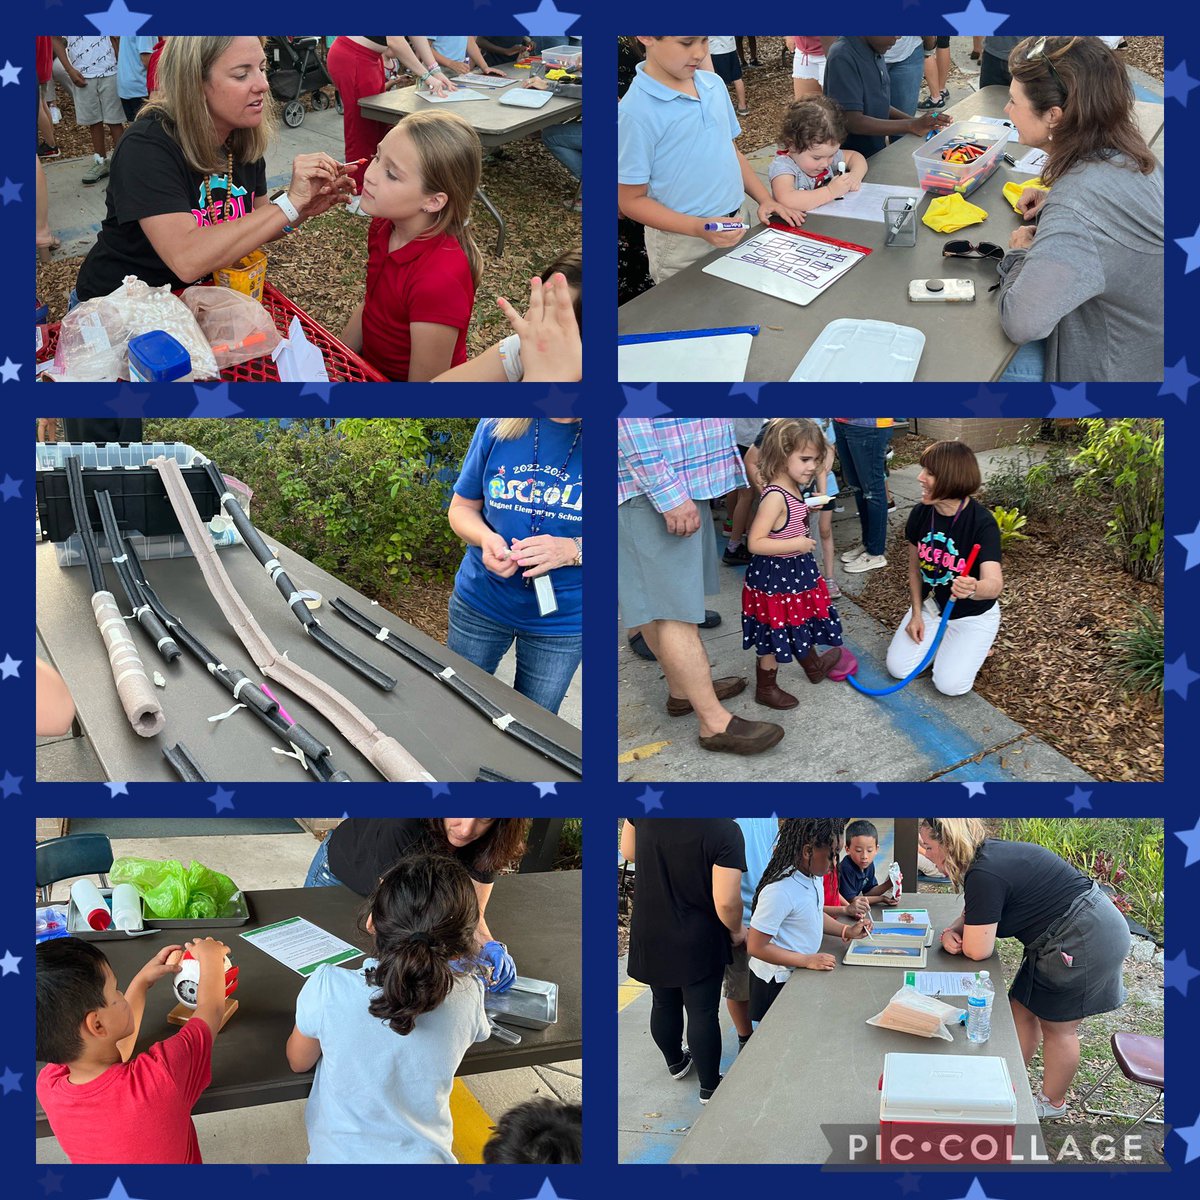 Angry Birds, Mission To Mars, drones, scabs, and rockets 🚀! Our kids had a “blast” today with a visit from the Orlando Science Center all day and night activities! Couldn’t be possible without our amazing PTA and teacher volunteers! @MagnetOsceola @JenniferN_VB